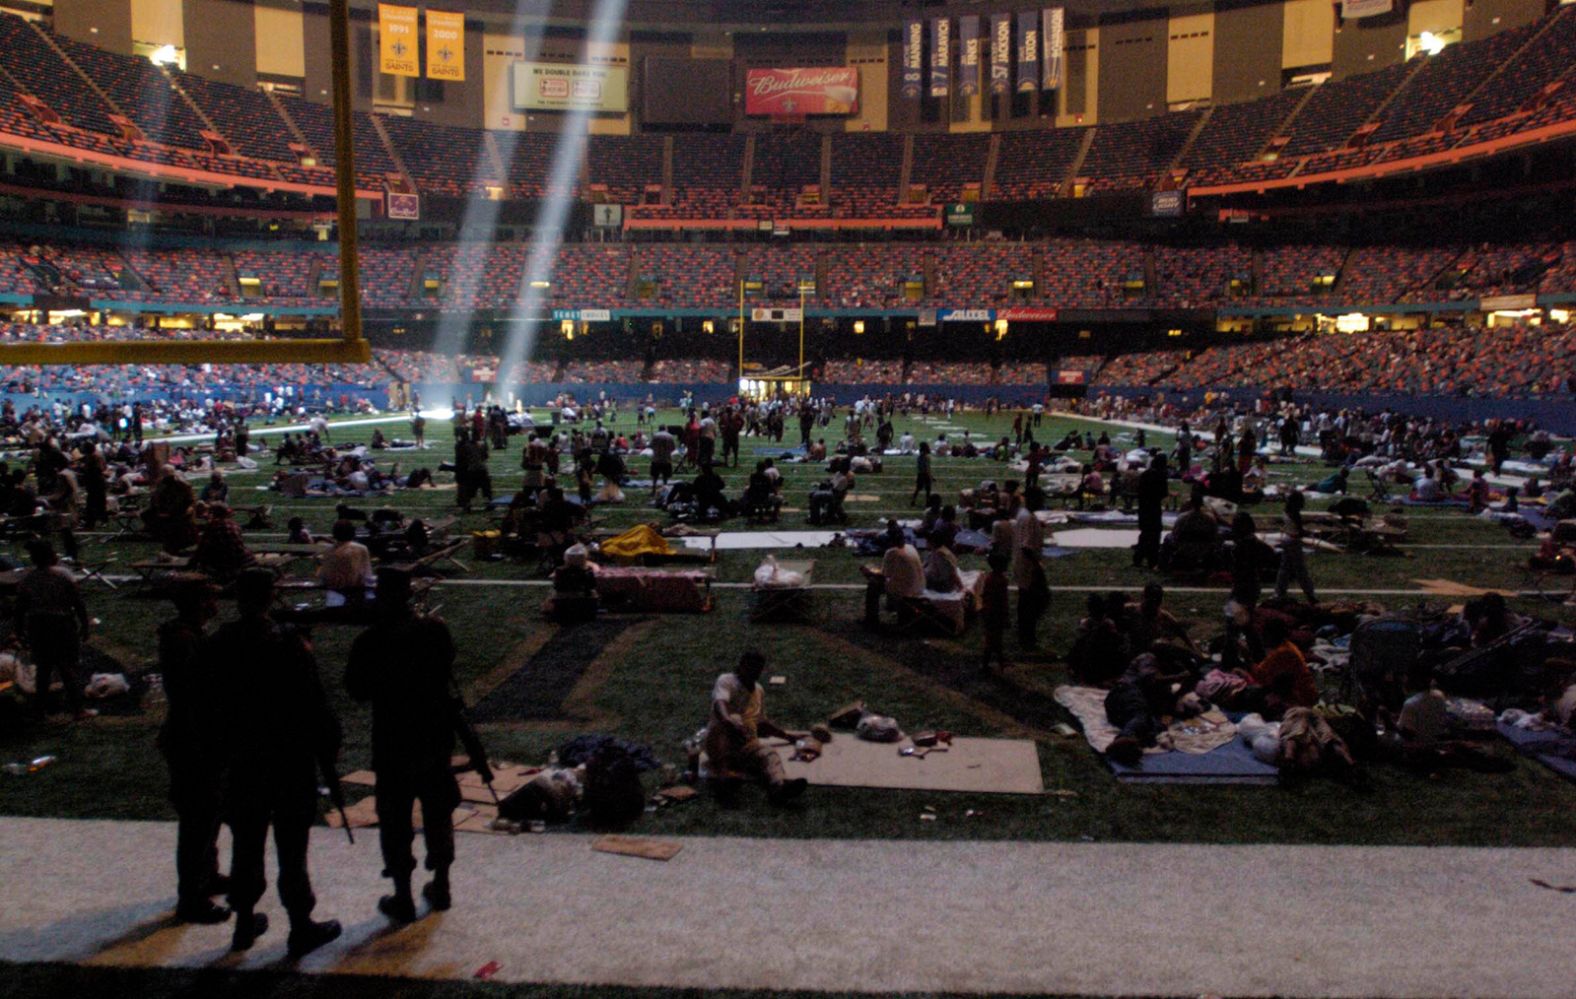 Members of the National Guard, standing in the foreground, watch over evacuees who took shelter at the Superdome in New Orleans. The shaft of light came from a hole in the roof of the dome.